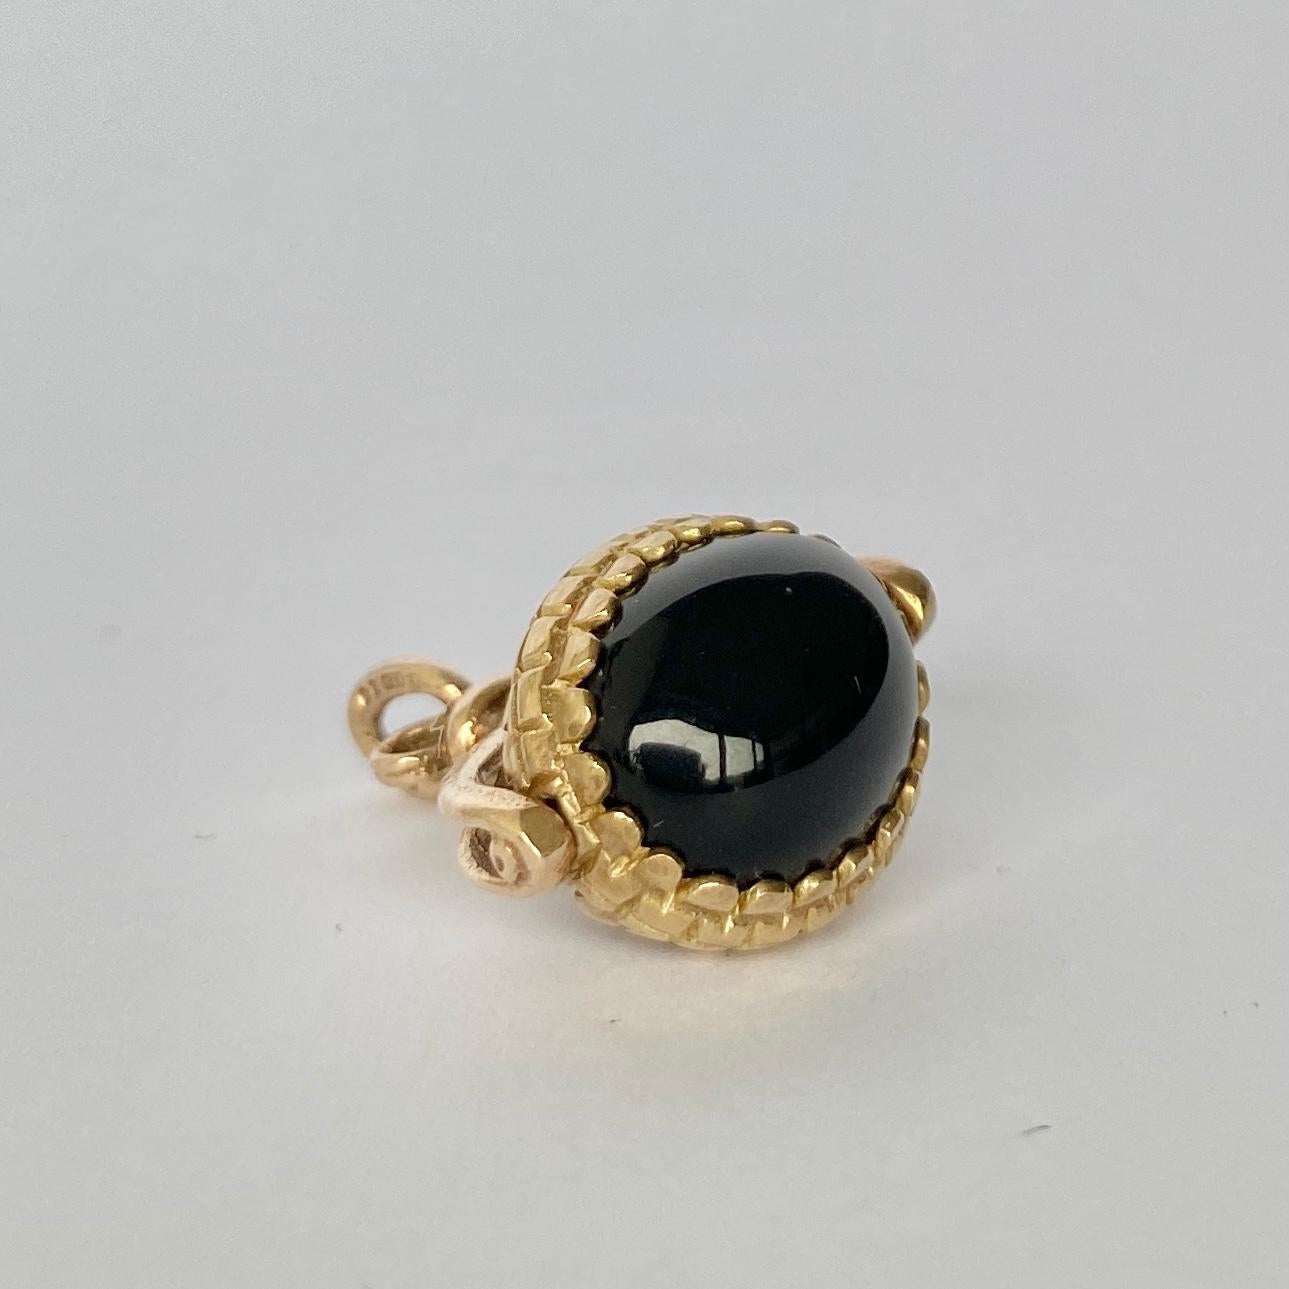 This sweet fob holds a cats eye and onyx stone that are rounded and smooth. The stones spin and have a decorative frame modelled in 9ct gold. Hallmarked London 

Fob height inc loop: 27mm

Weight: 6.65g